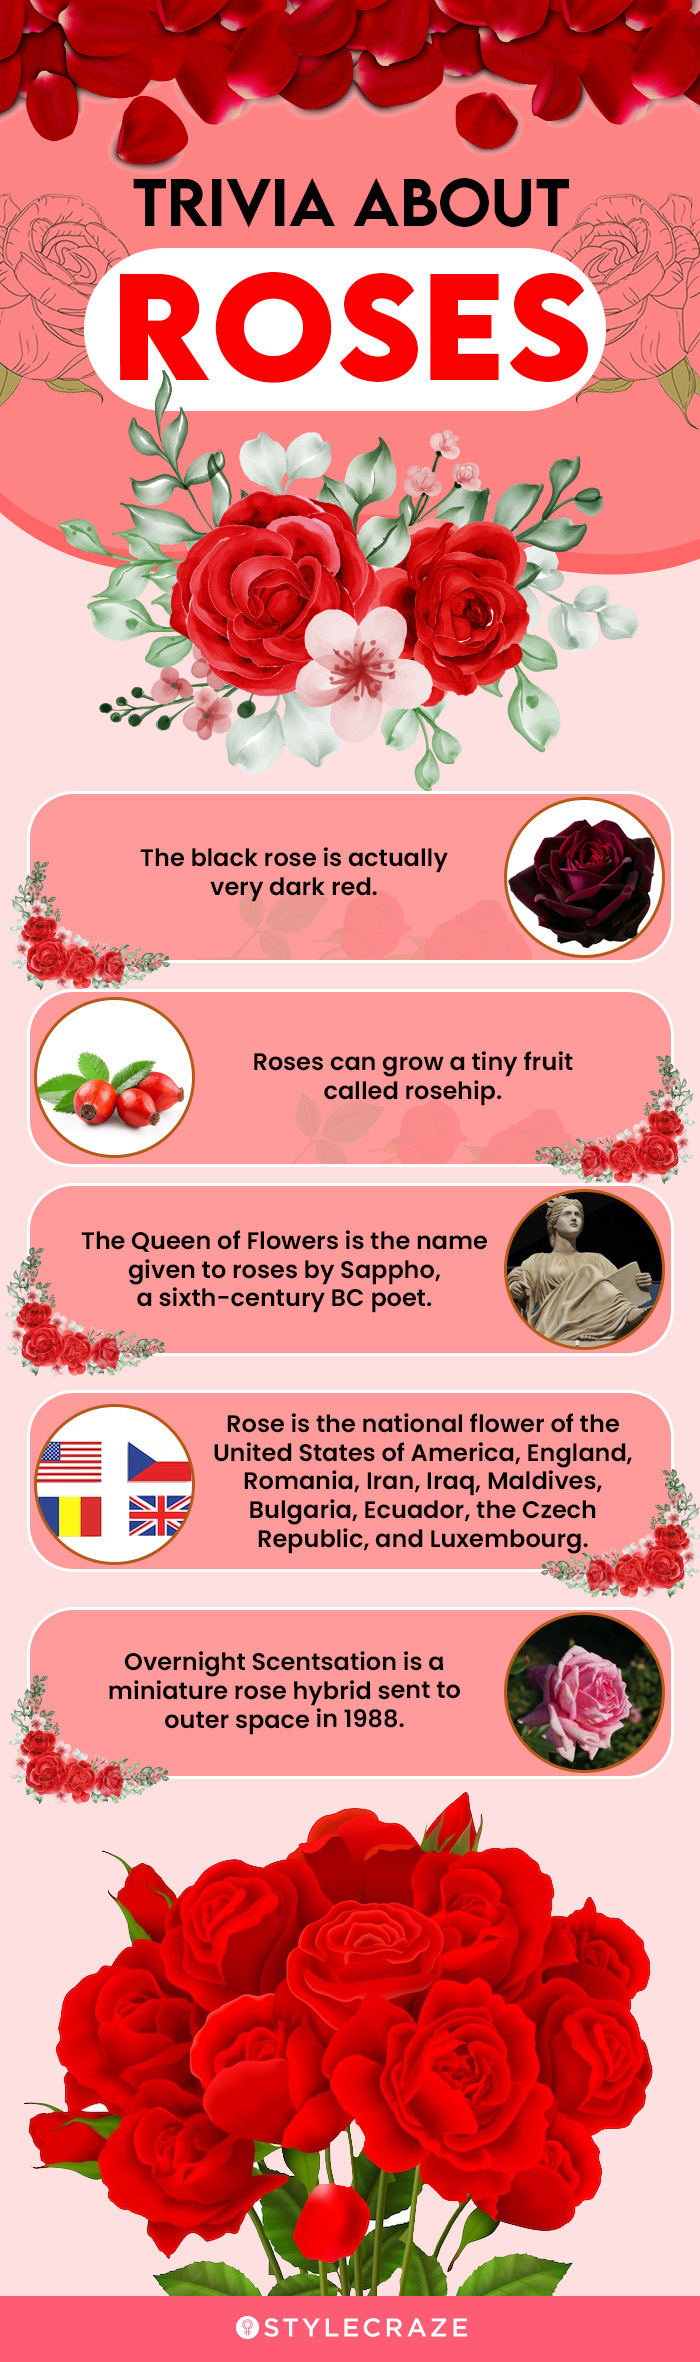 trivia about roses [infographic]